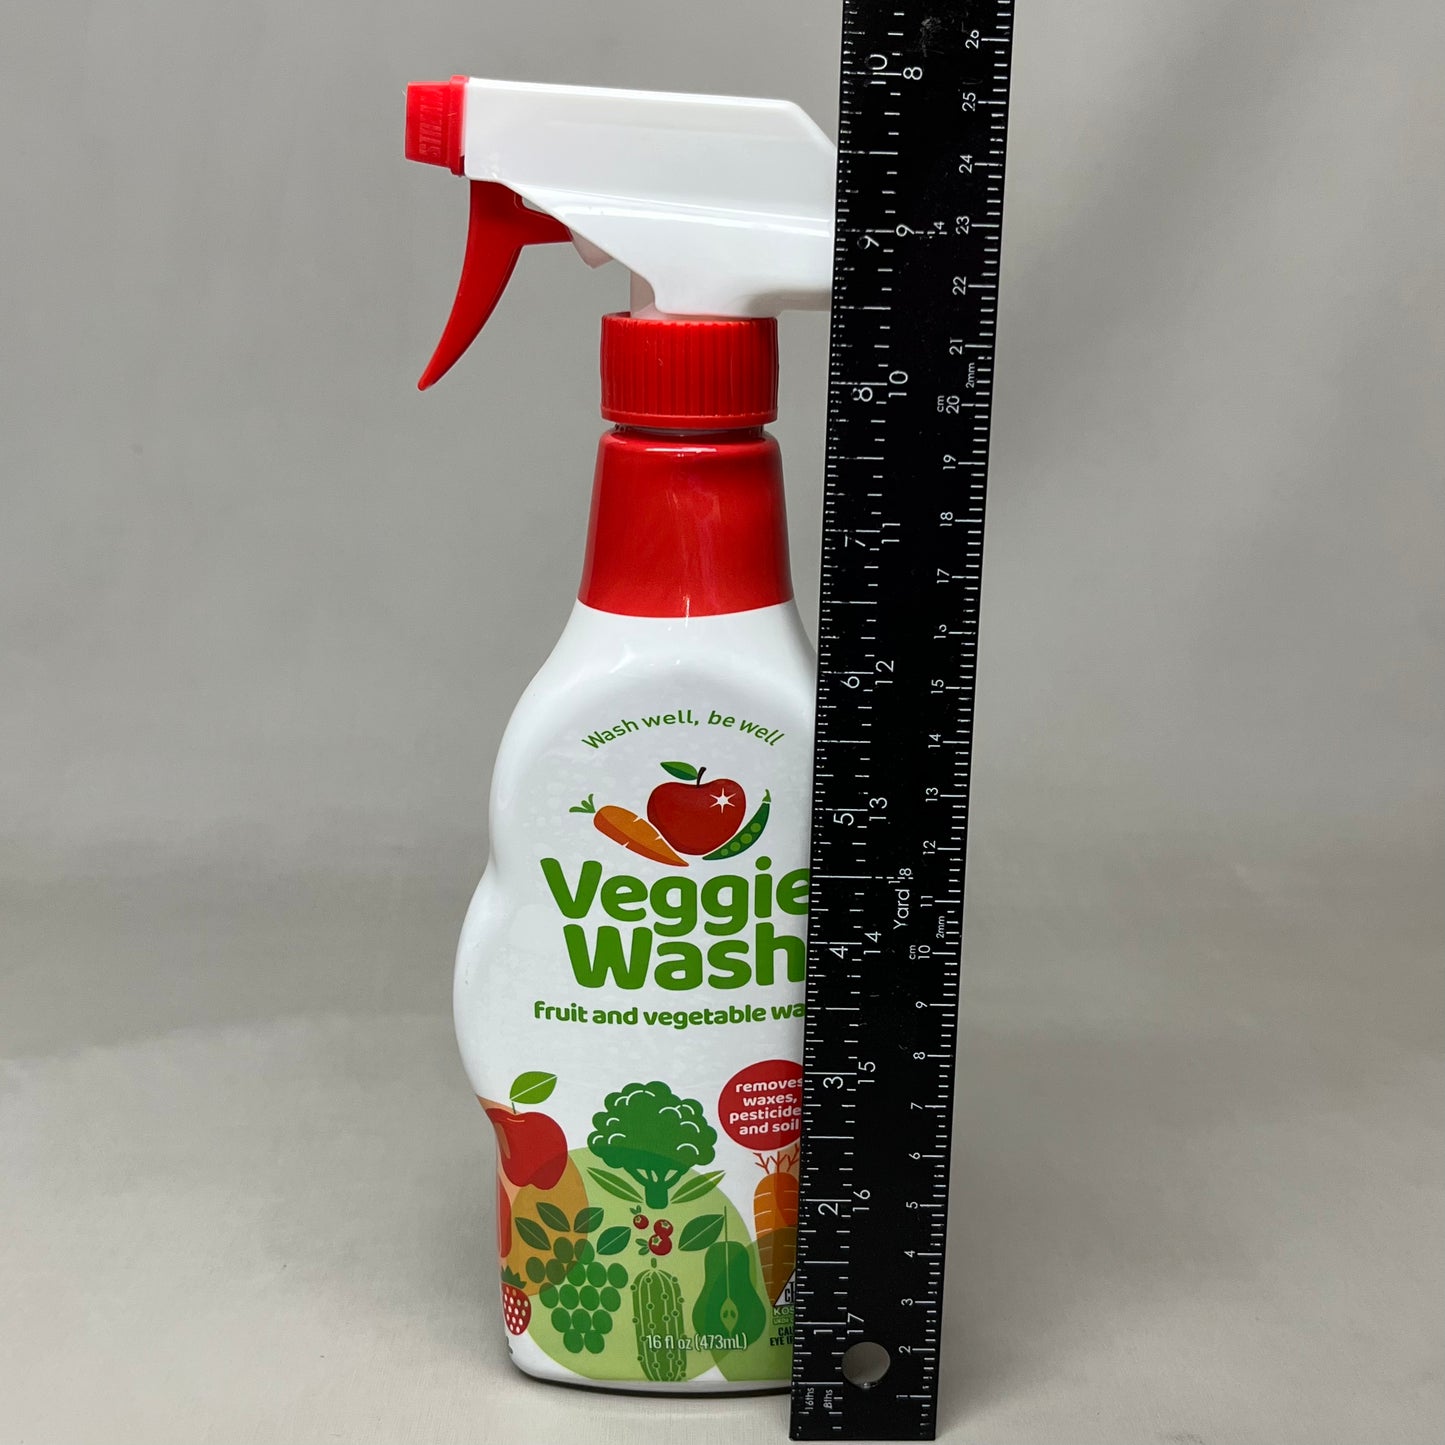 2 Pack Fruit and Veggie Wash